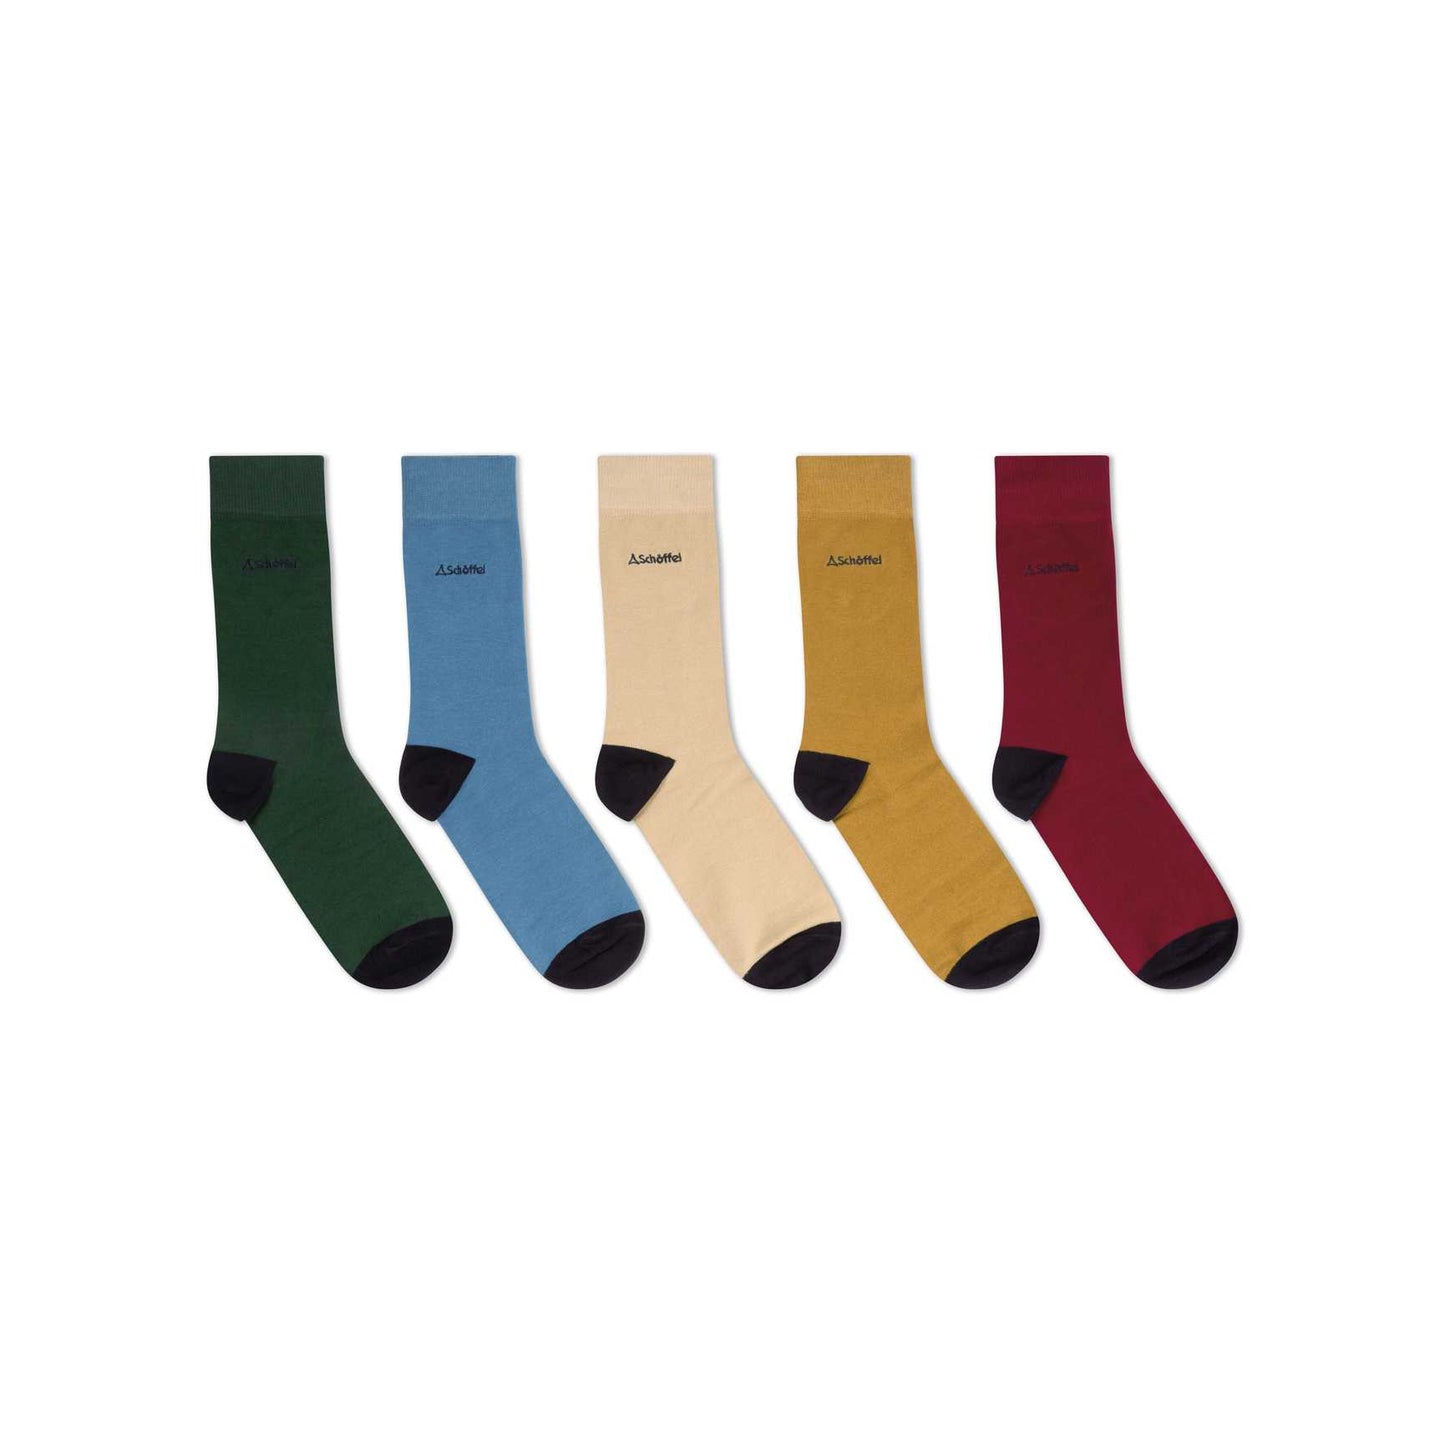 Schoffel, The Bamboo Sock (Box Of 5) - 20-3960 - Logo Oat Mix